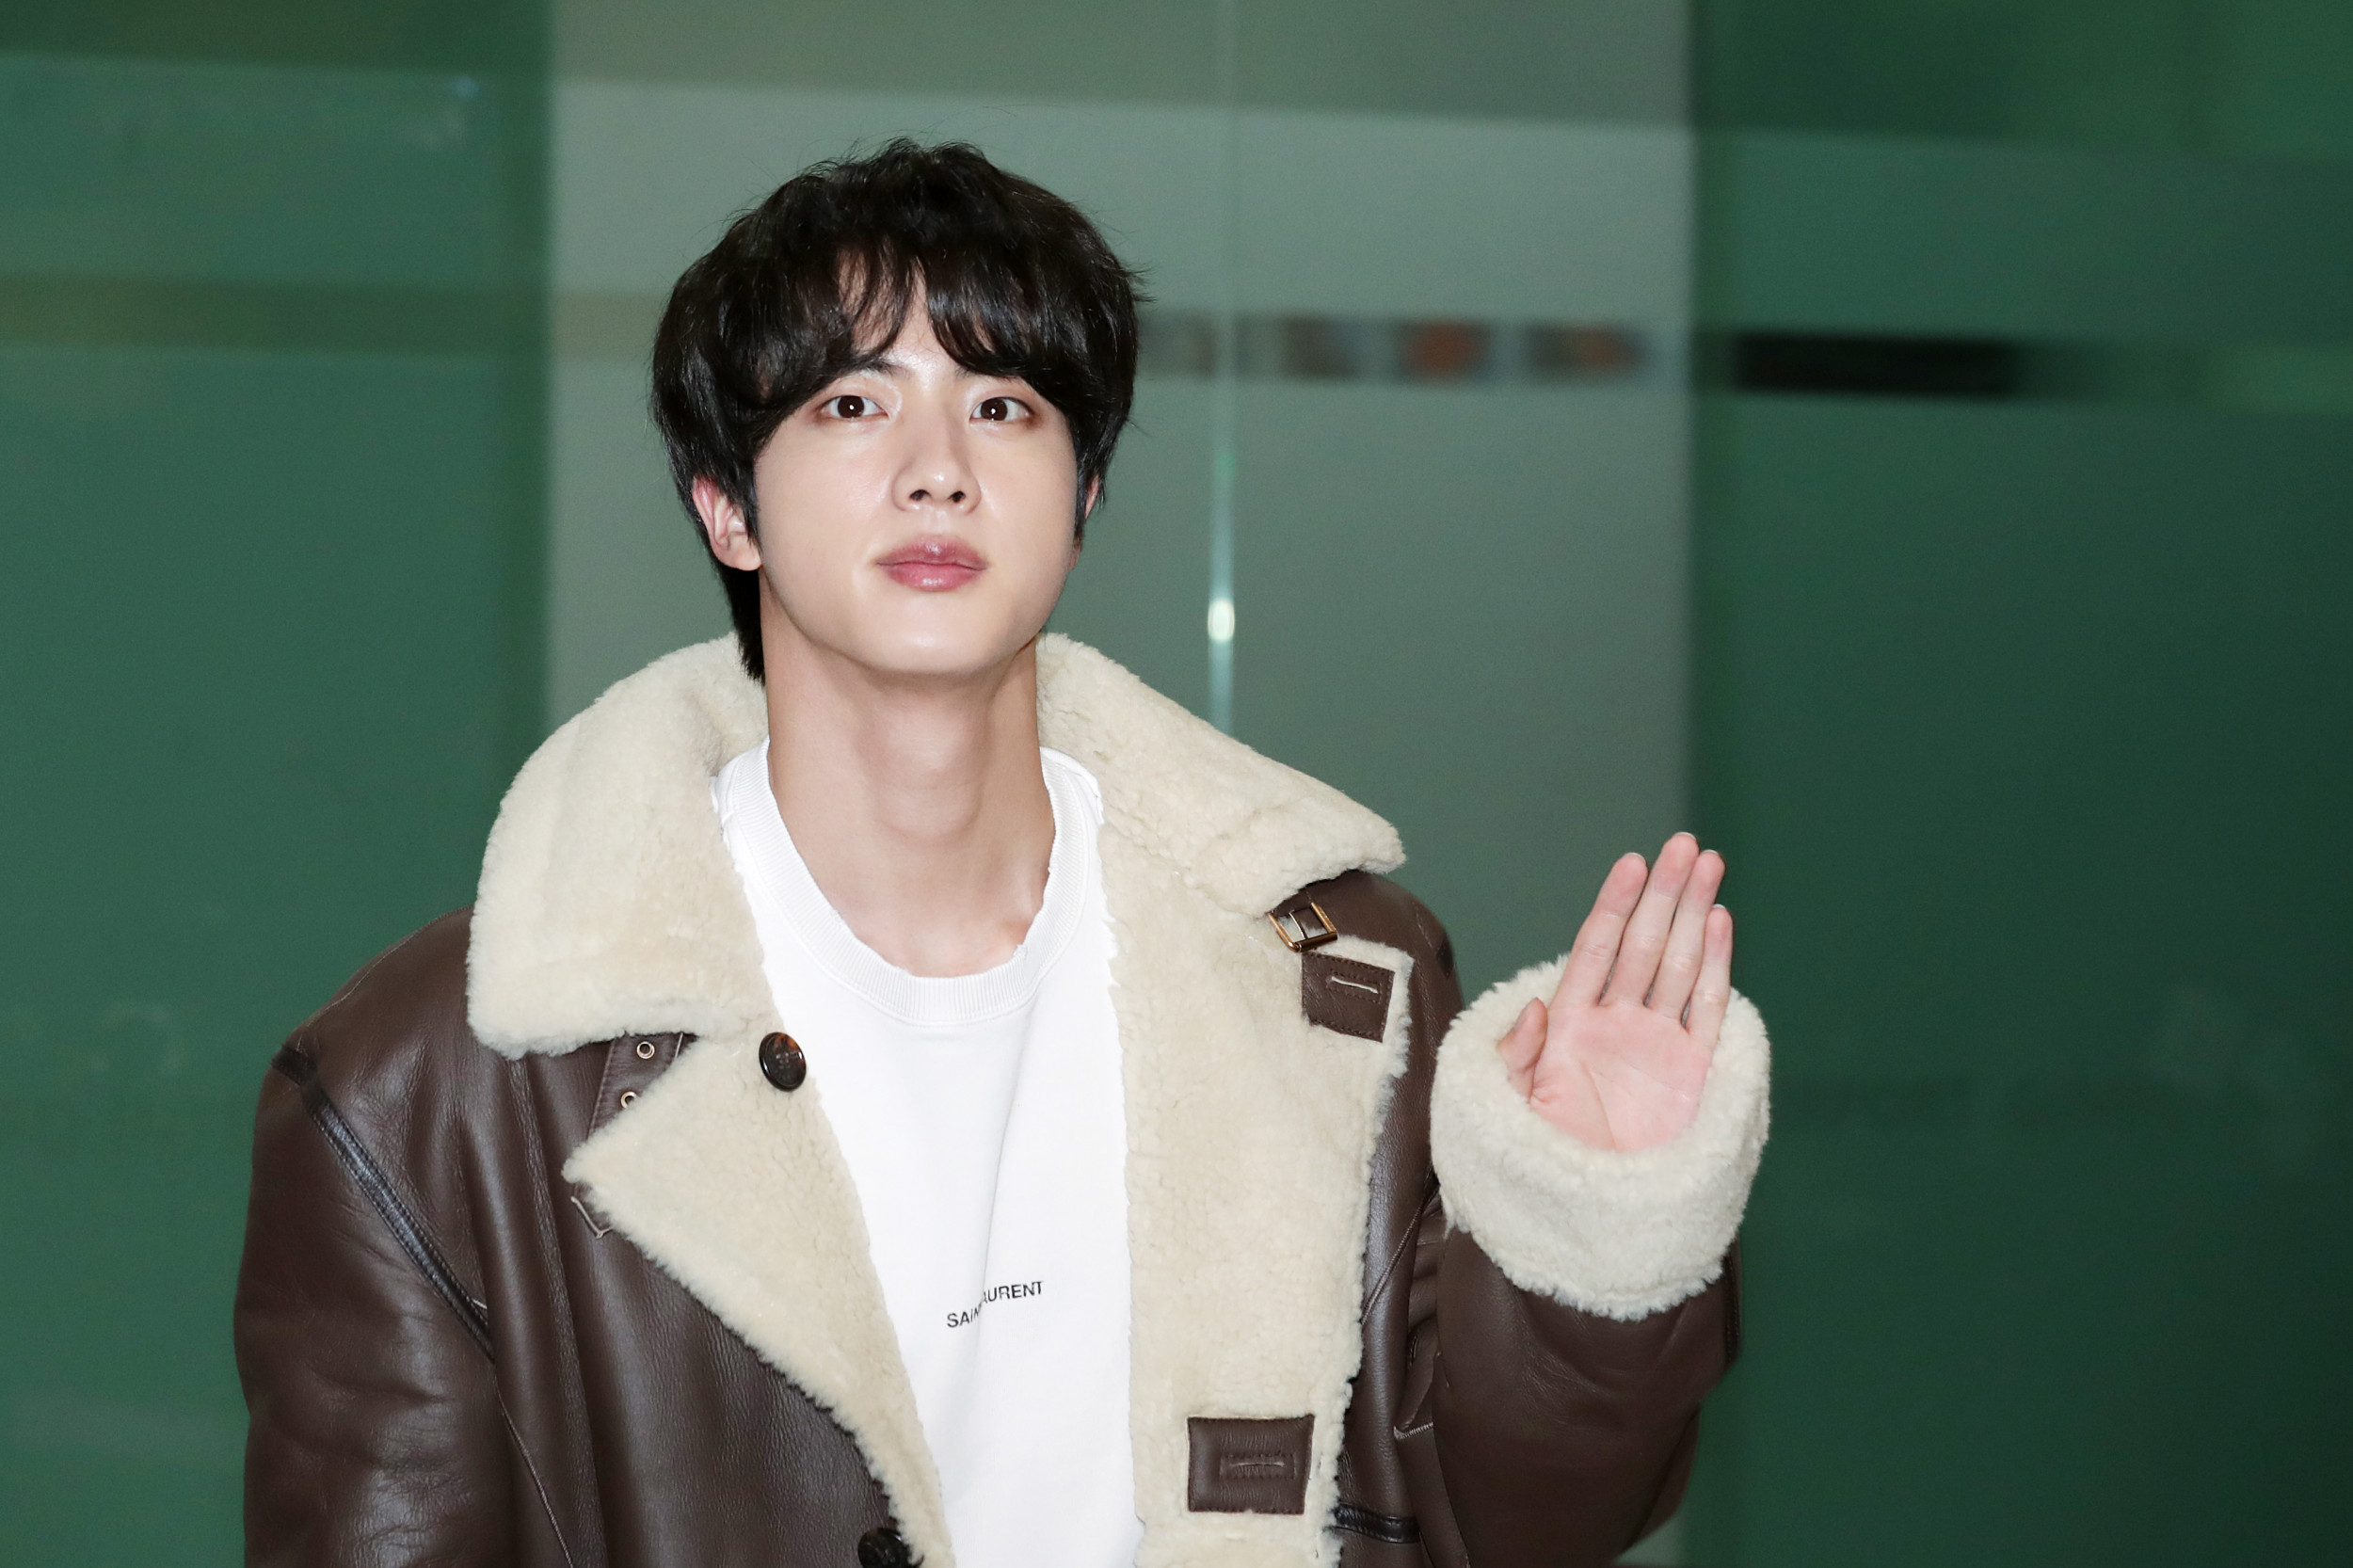 BTS Member Jin May Face Travel Restrictions Next Year Under New South